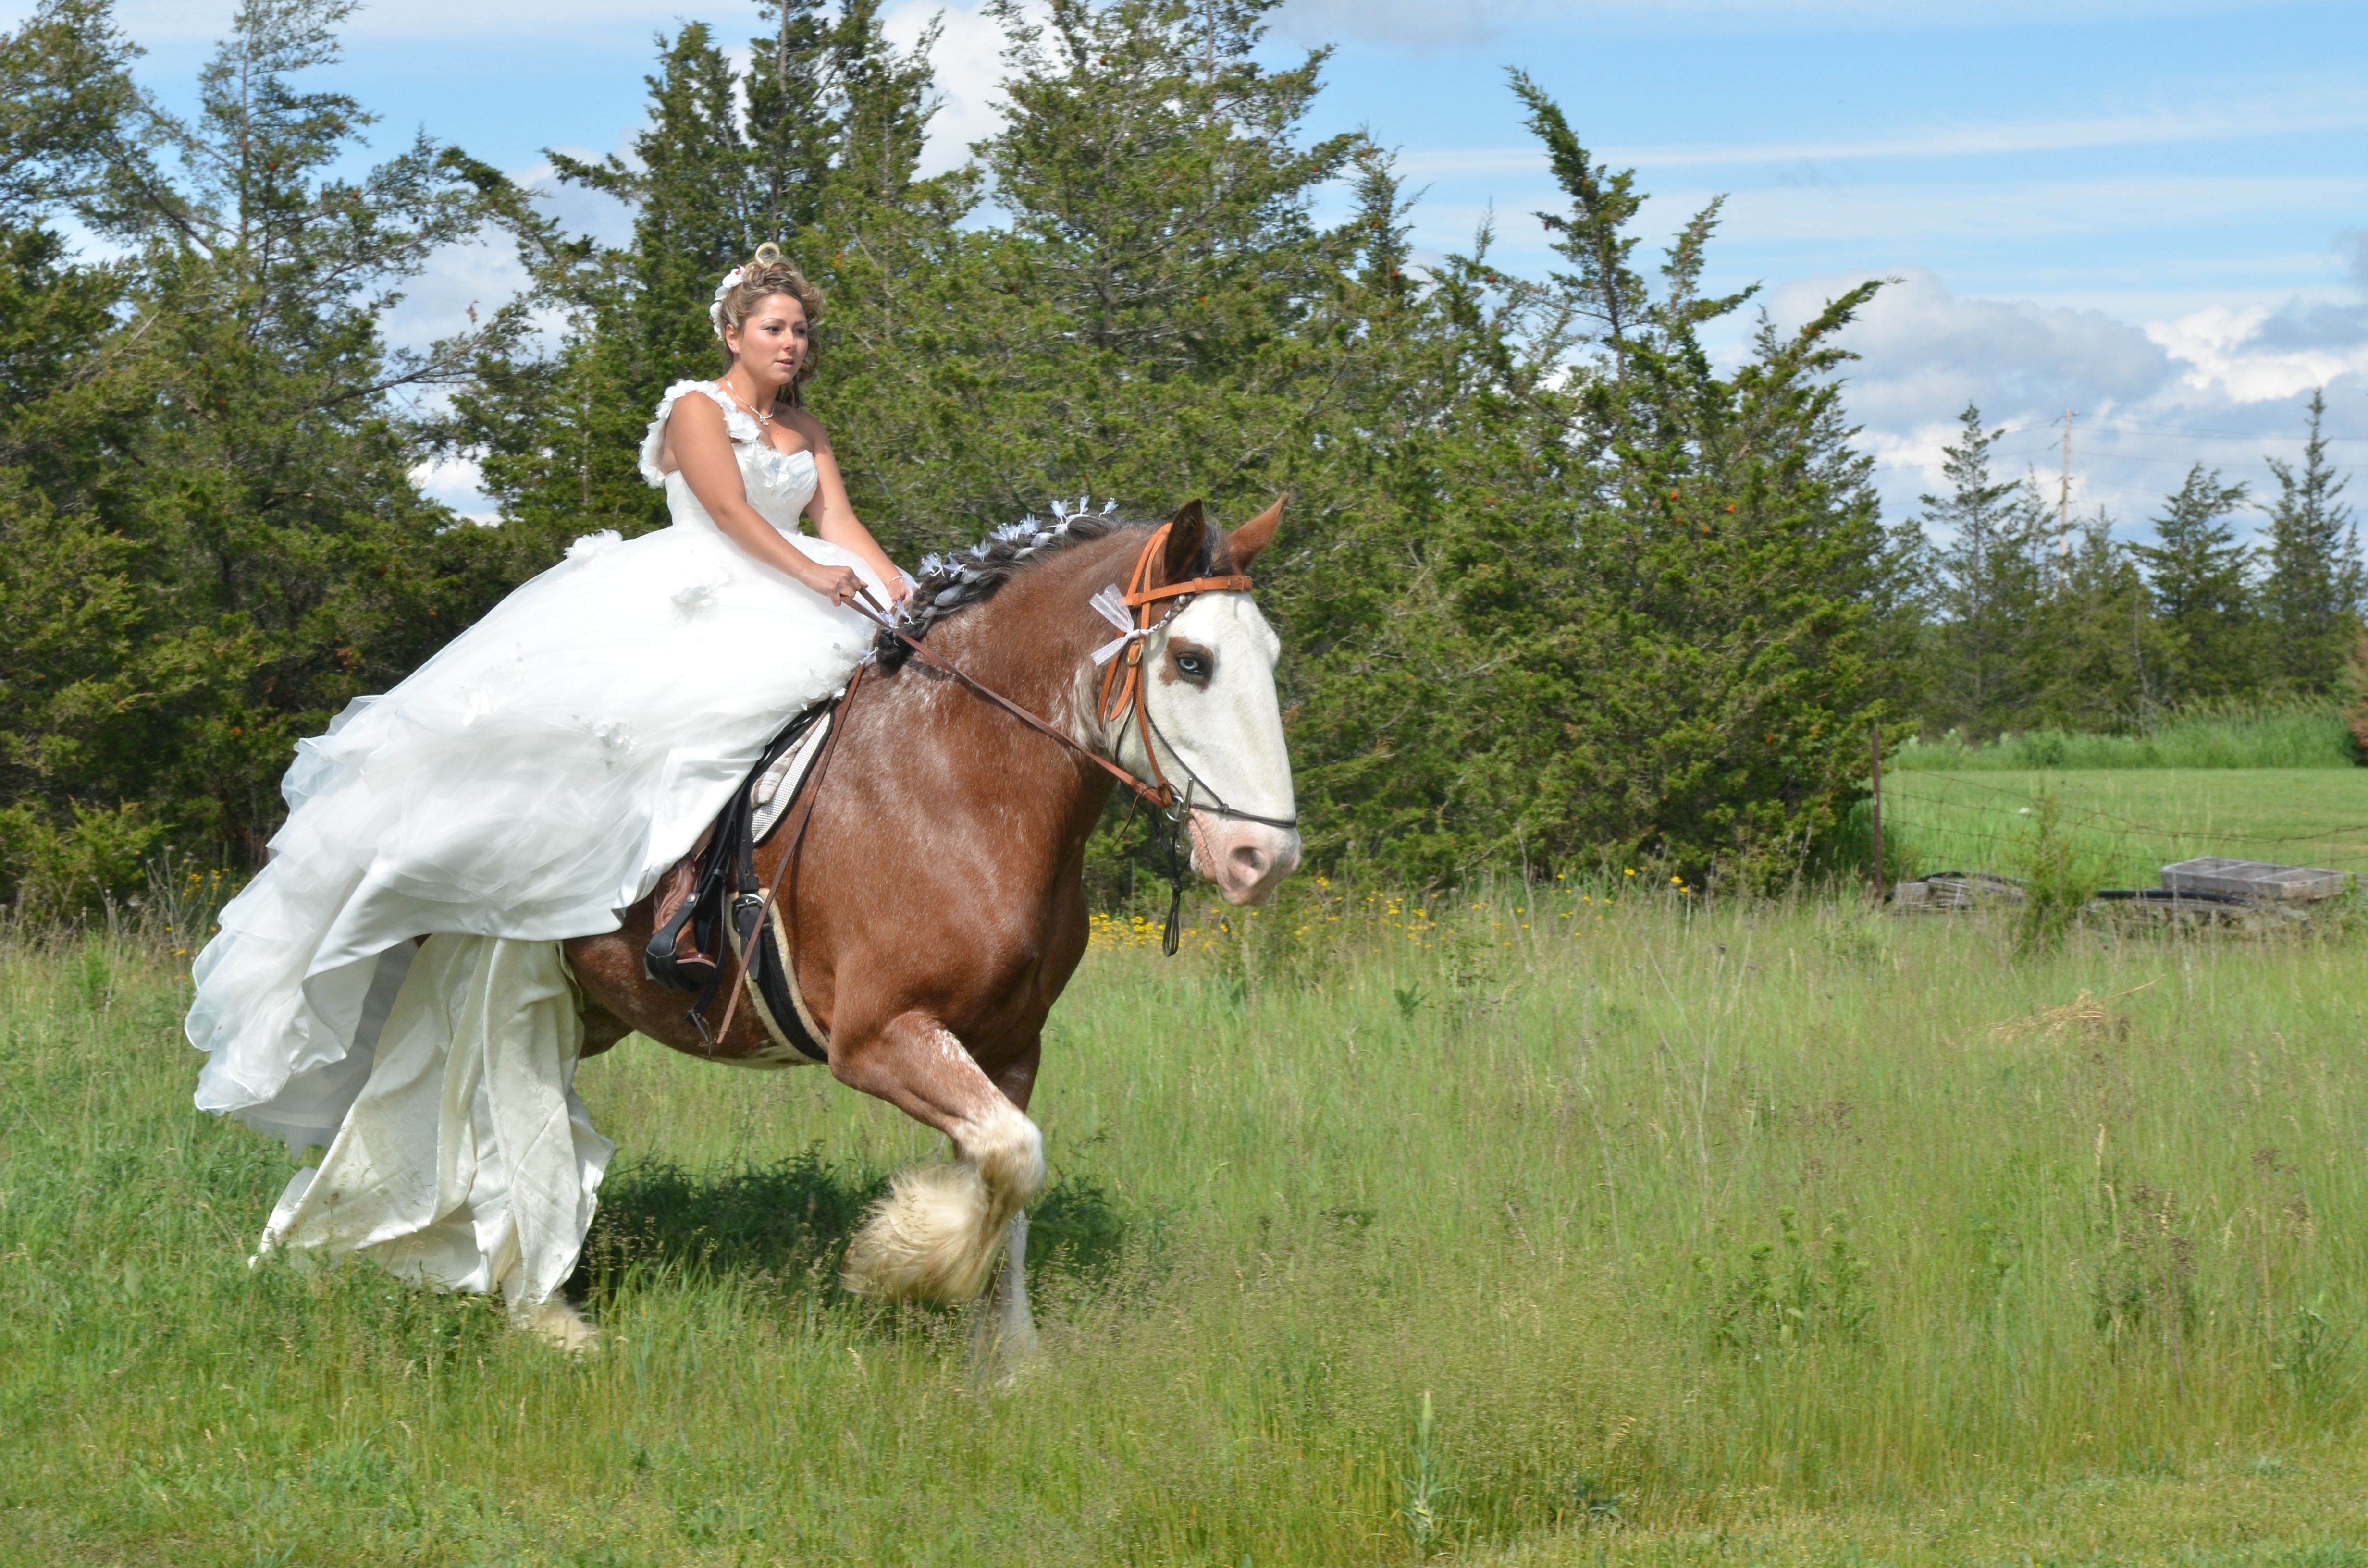 clydesdale wedding | Random | Pinterest | Clydesdale and Horse